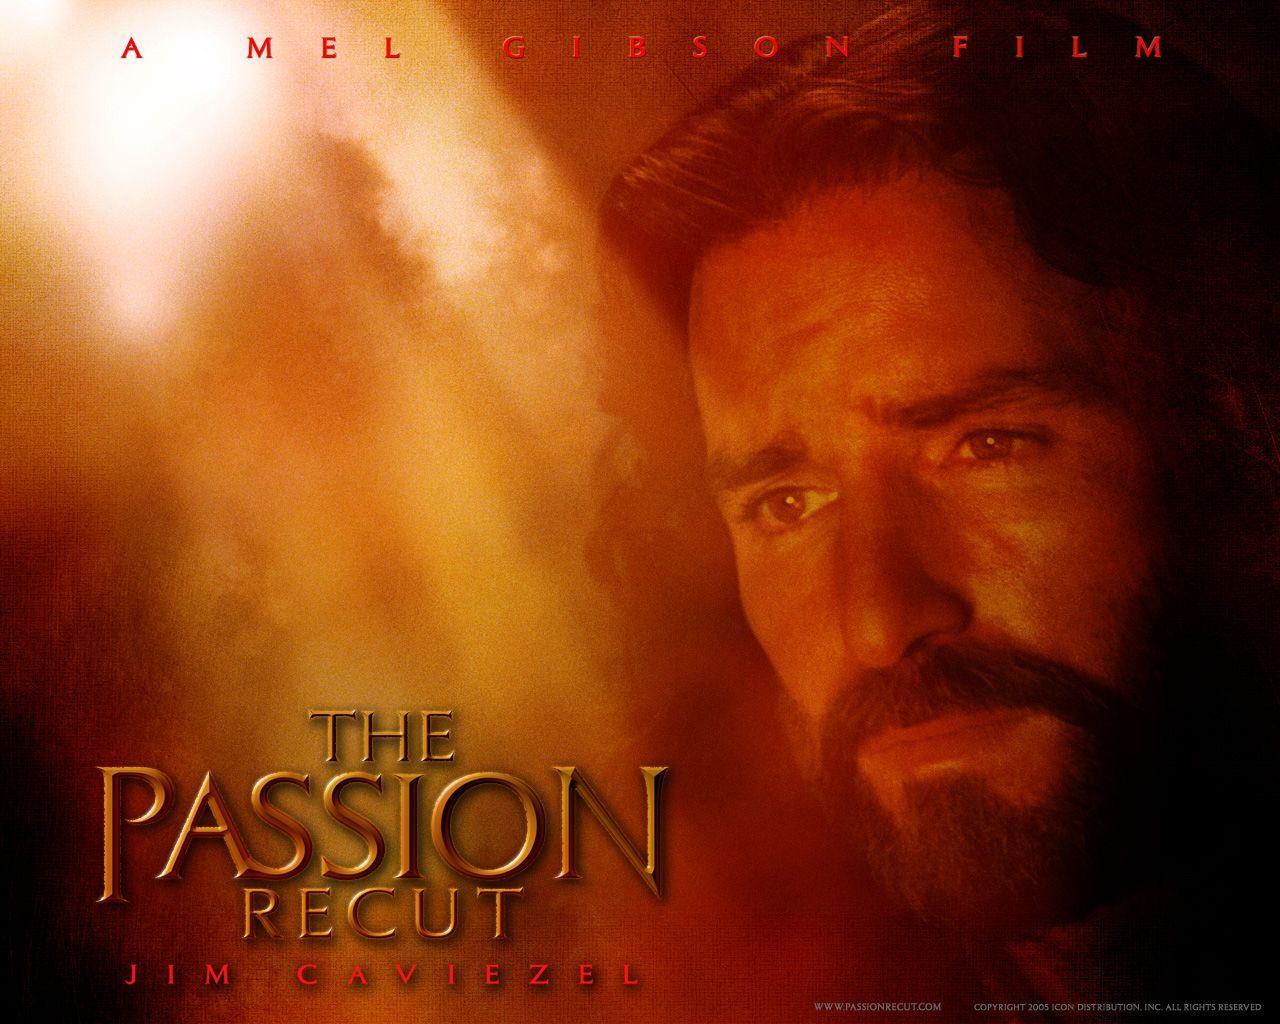 christian picture. Christian Movie: The Passion of the Christ